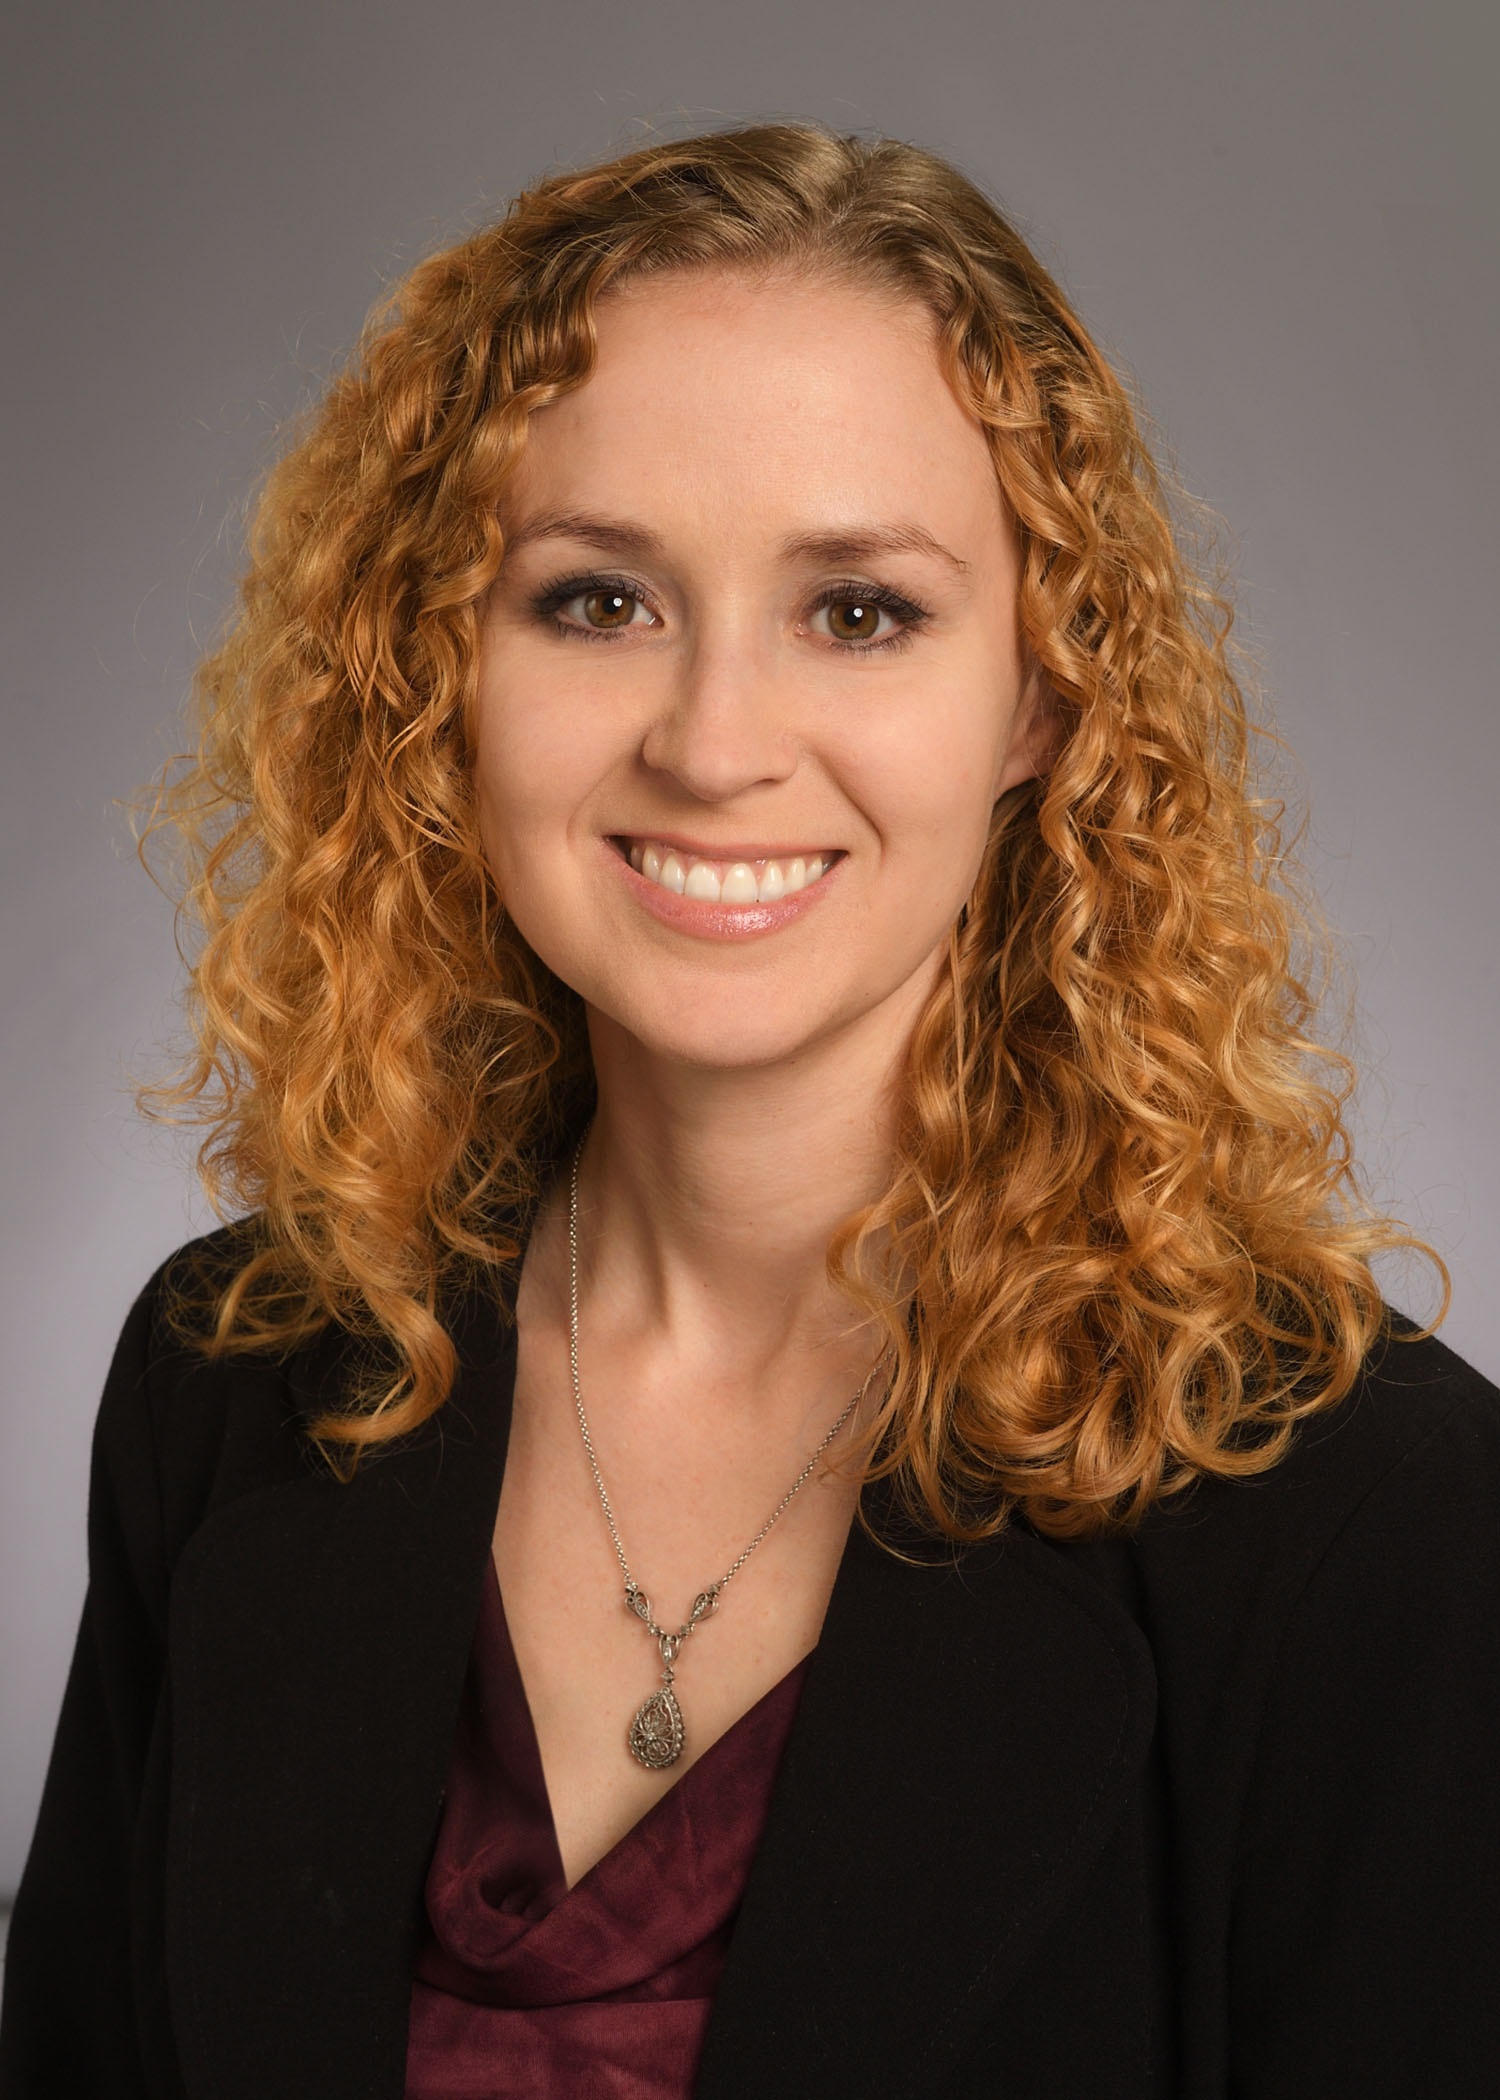 Lindsay Prizer, PhD, MSW, LCSW